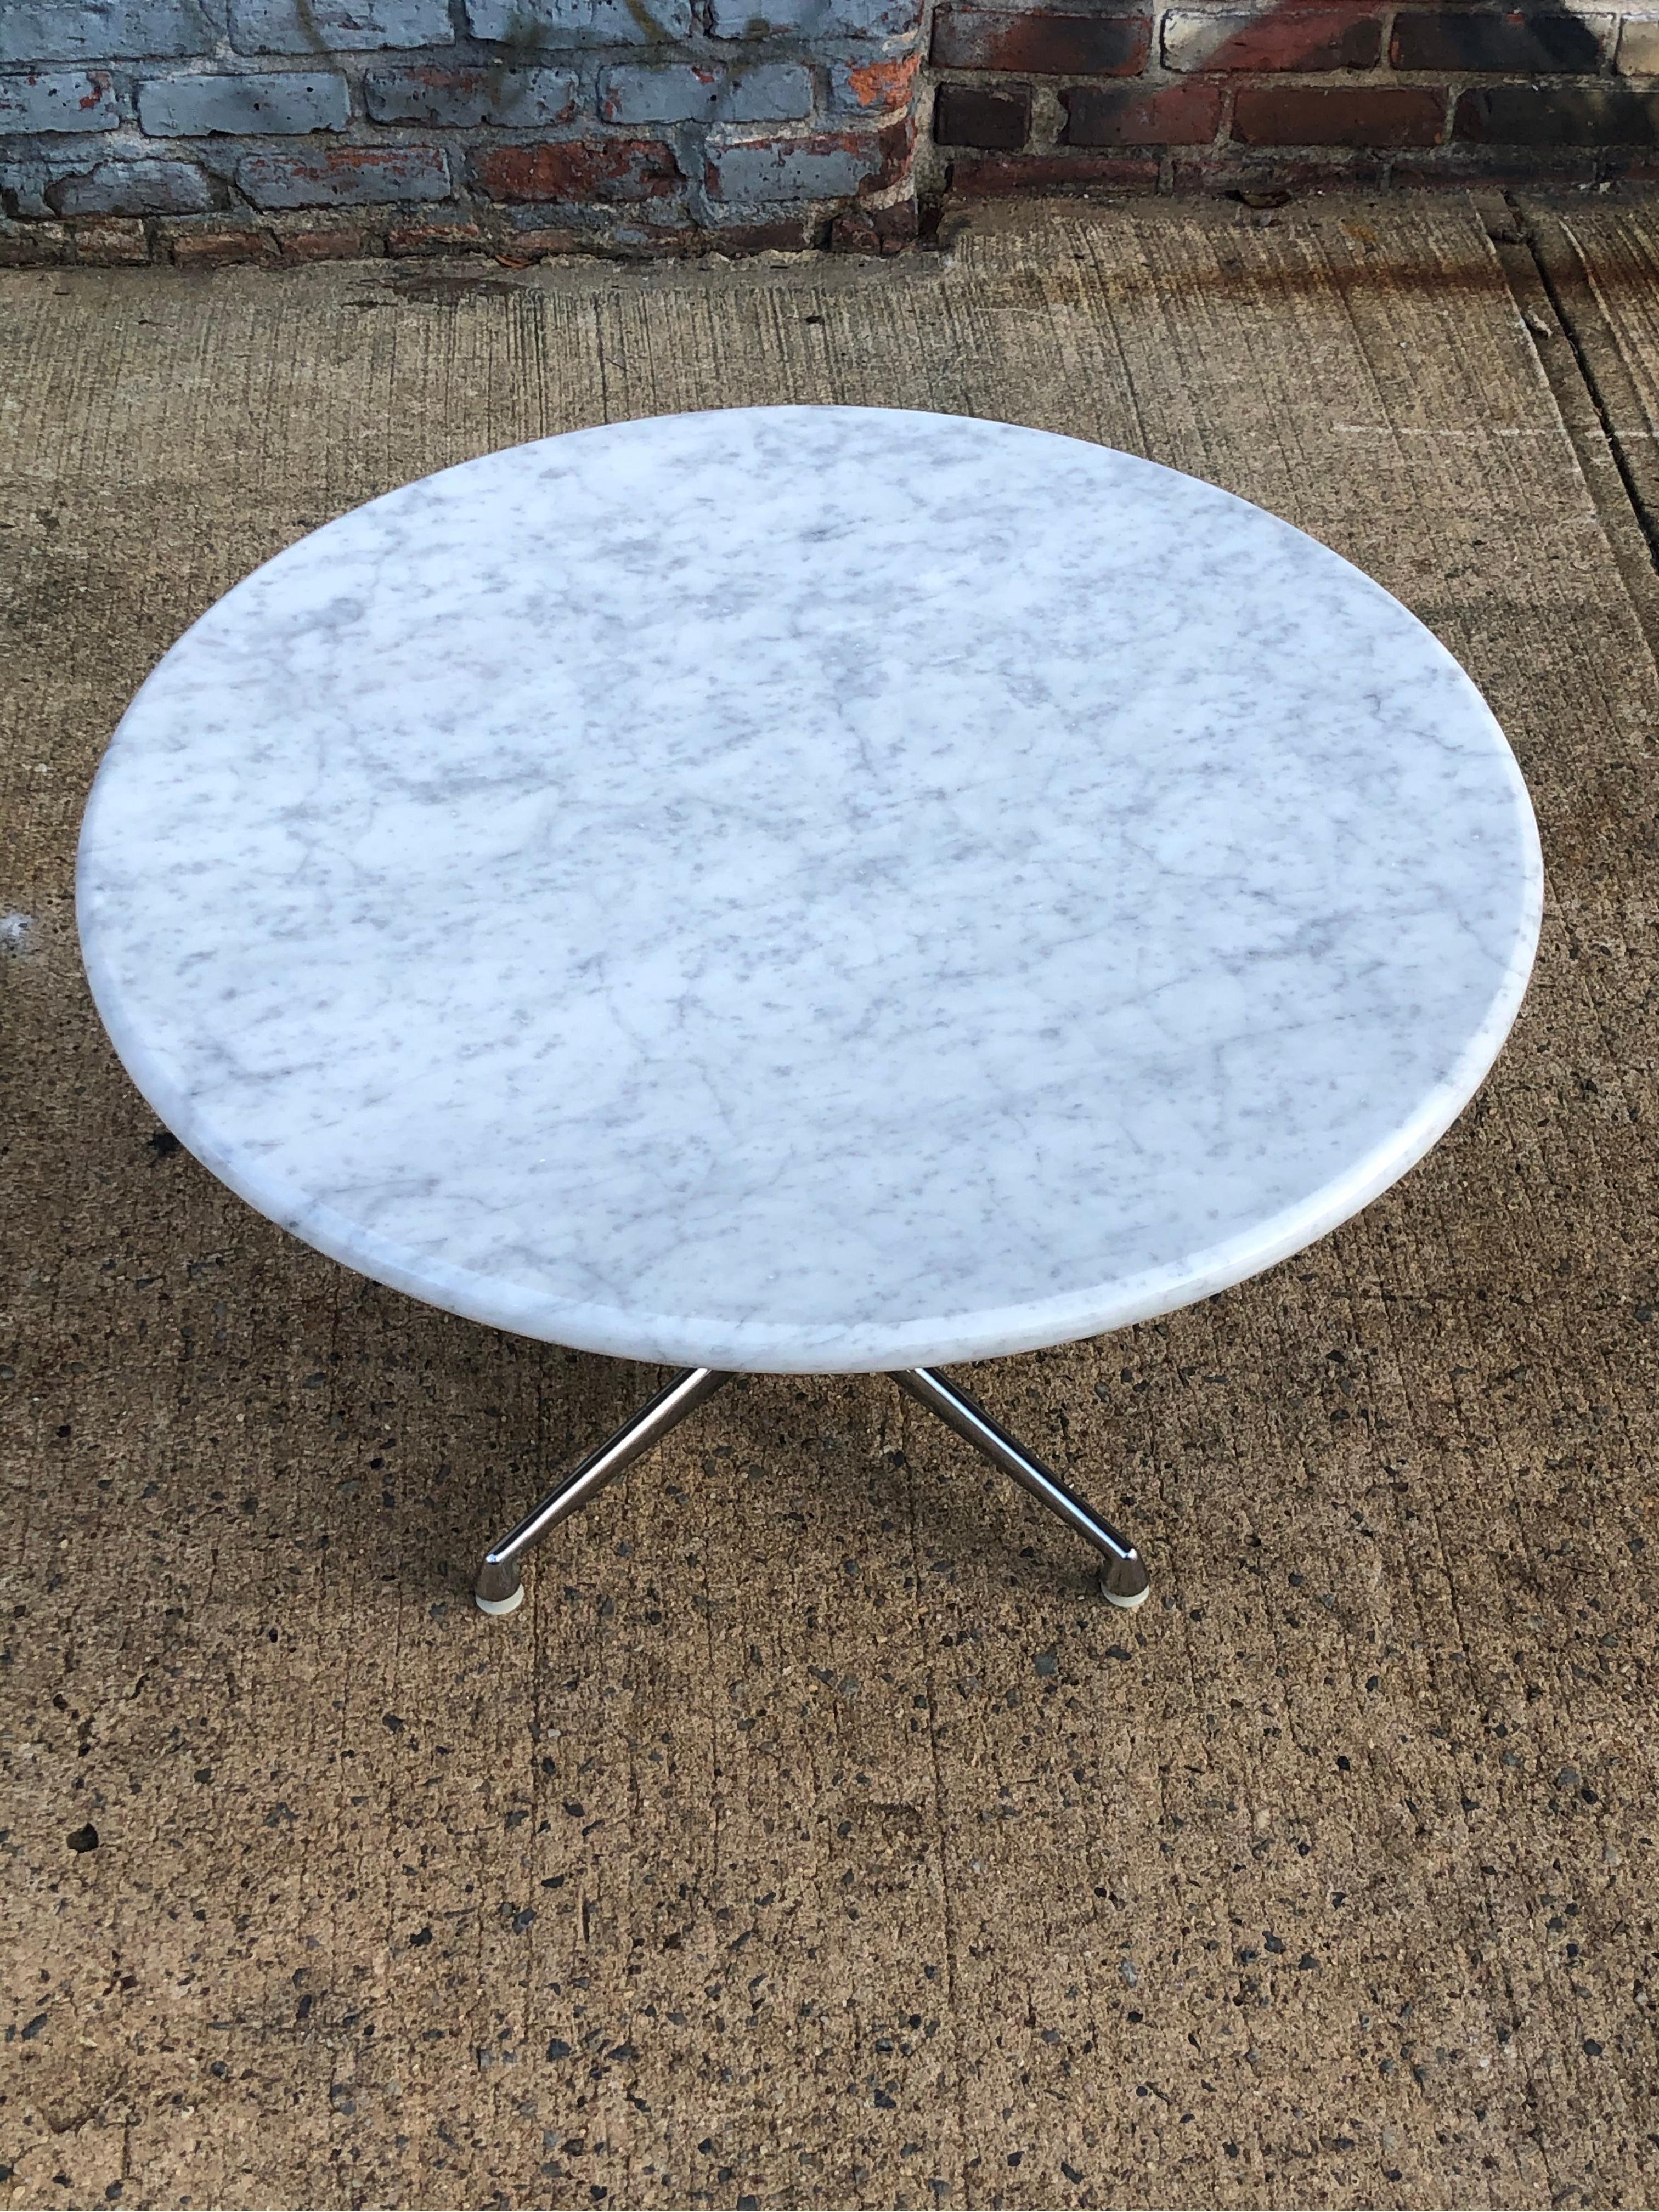 Gorgeous La Fonda coffee table by Charles and Ray Eames and produced by Herman Miller. New white Carrara marble slab with full bullnose rounded edge rests on a top chrome base. The marble is new and custom cut (photo shown is the last one we made,